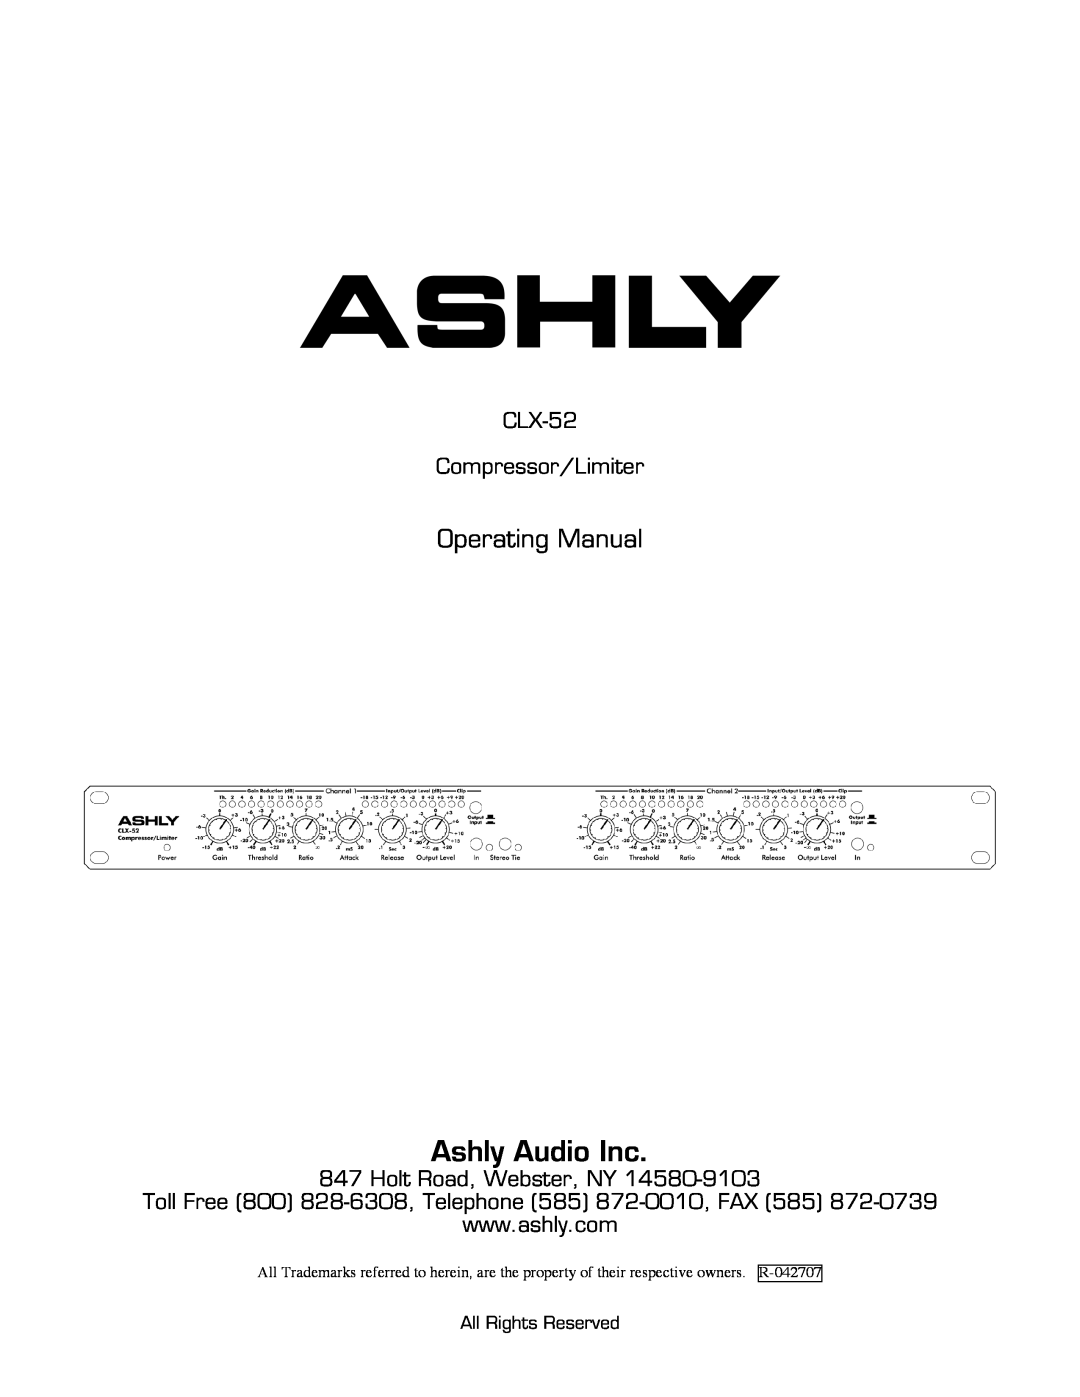 Ashly specifications CLX-51/CLX-52Peak Compressor/Limiters, Architects Specifications, Technical Notes & Specifications 